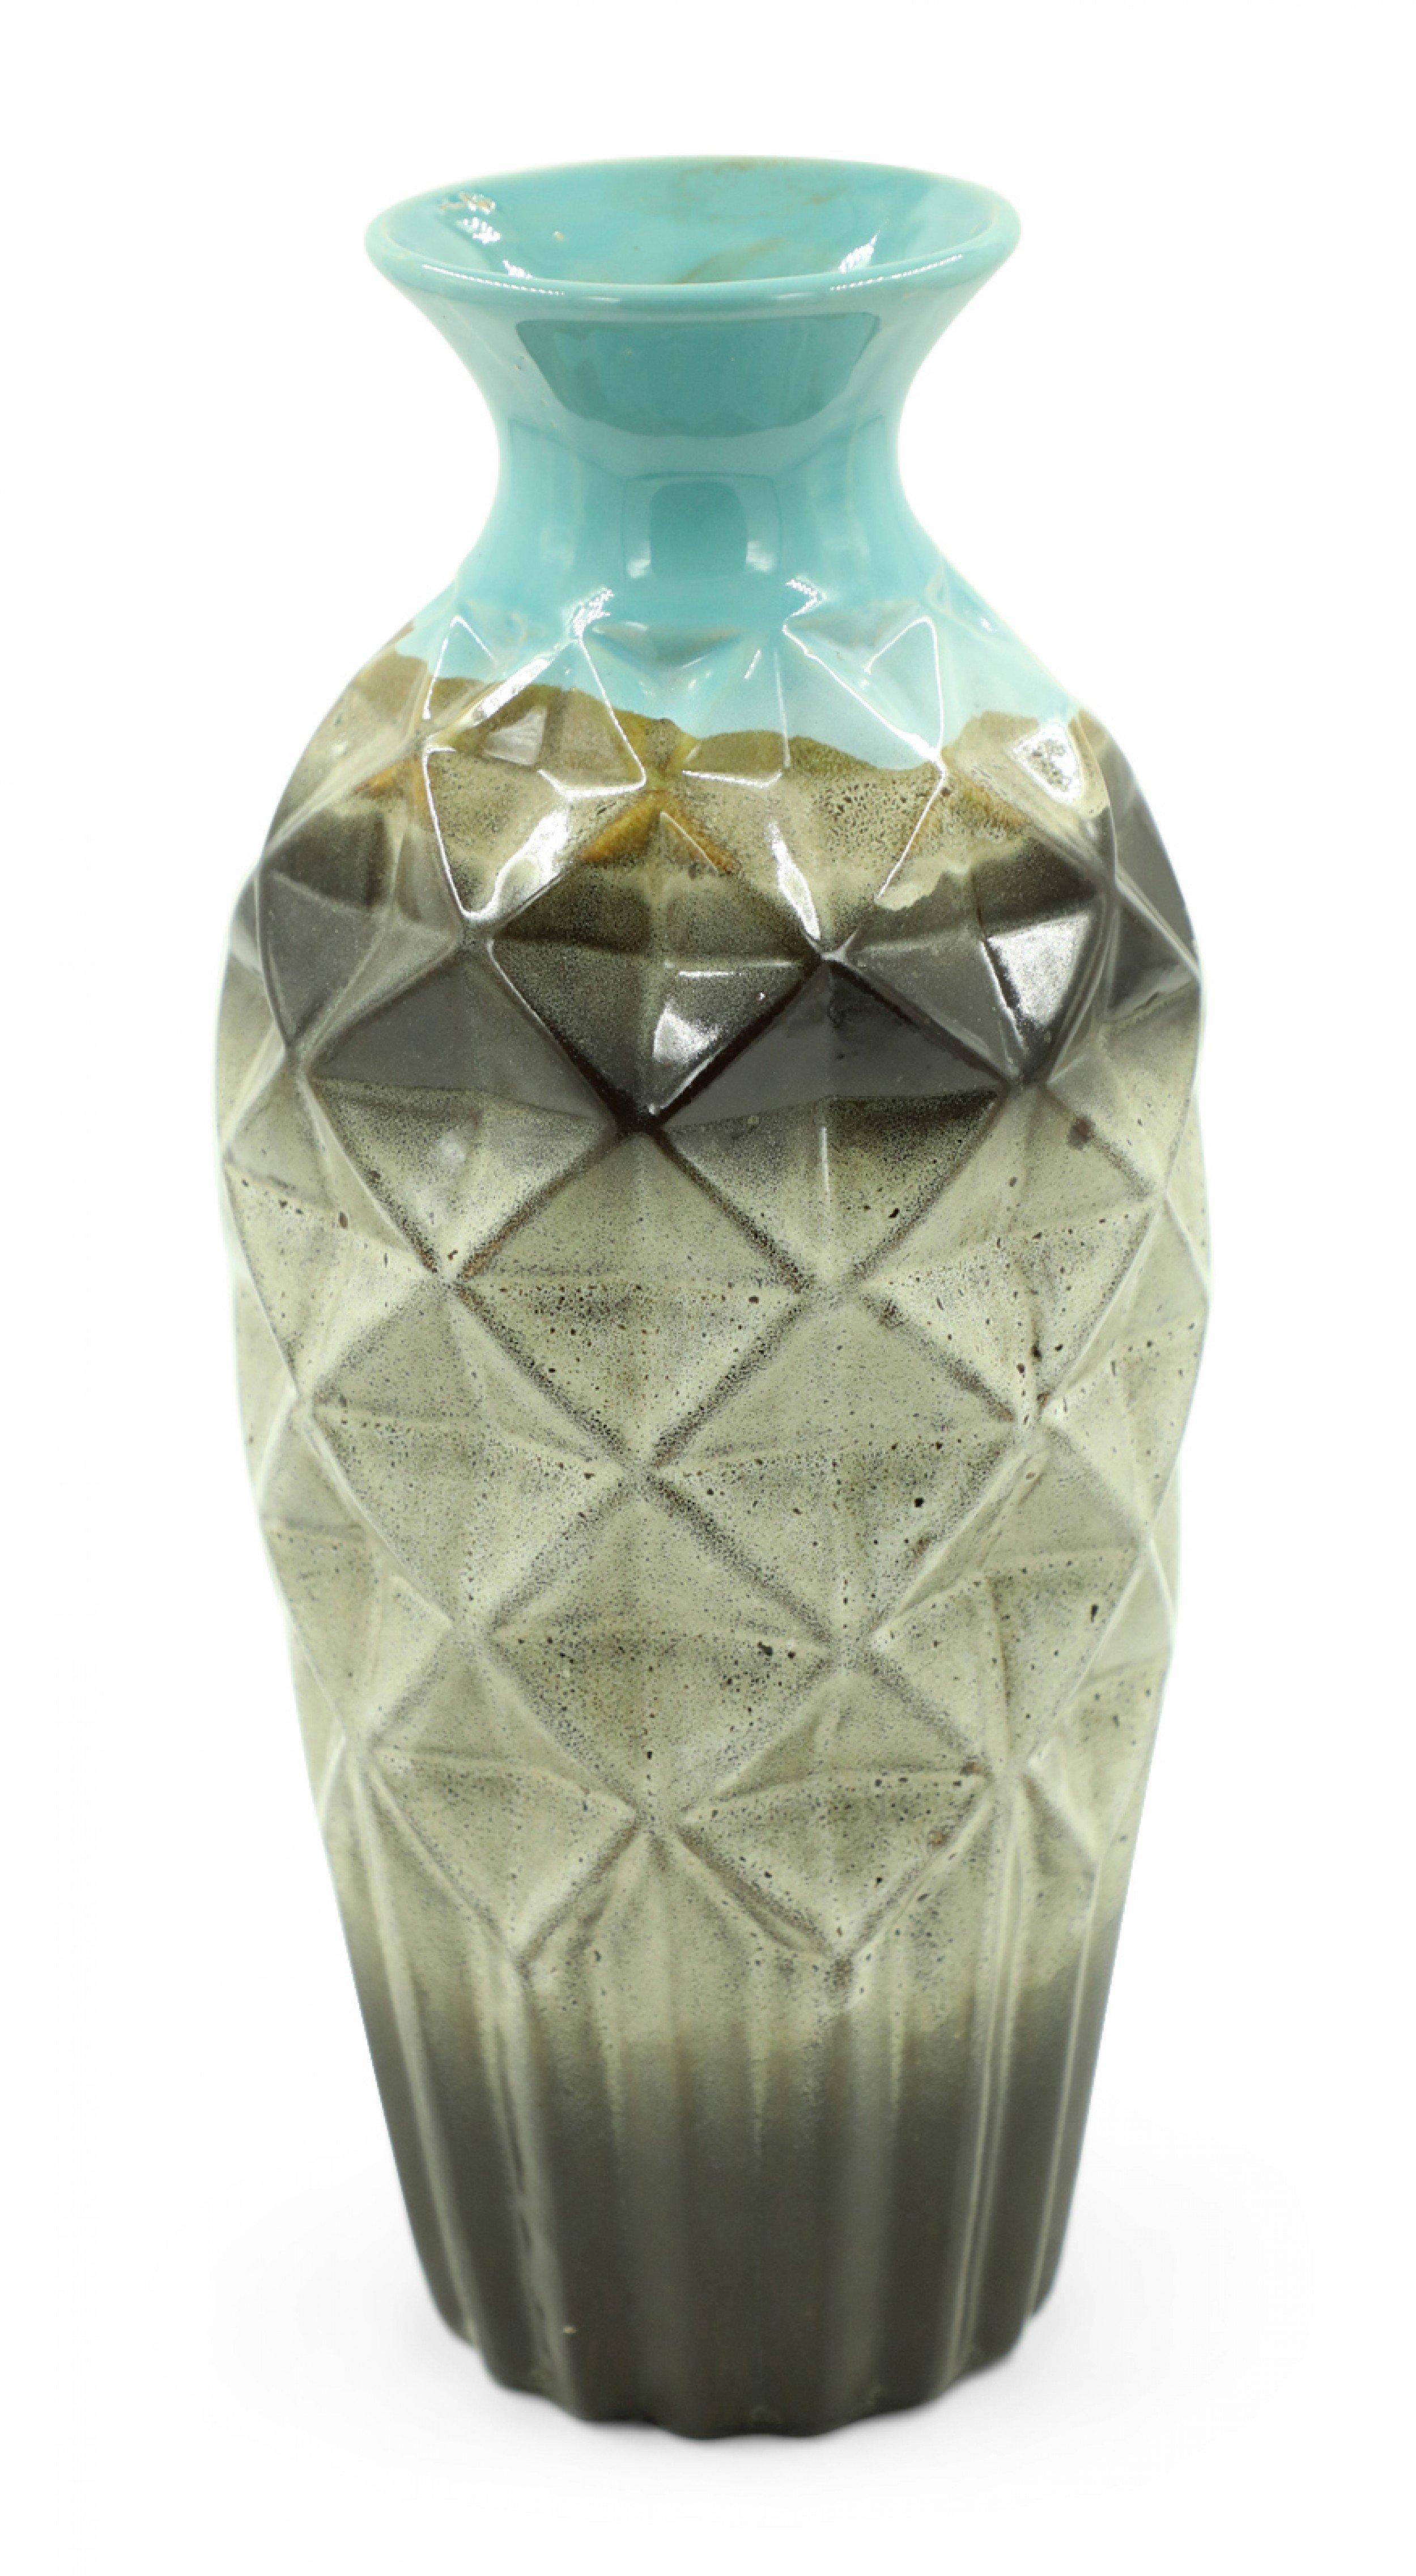 Contemporary blue, brown and beige glazed ceramic vase with a faceted geometric urn-shaped body, ribbed base, and fluted opening.
    